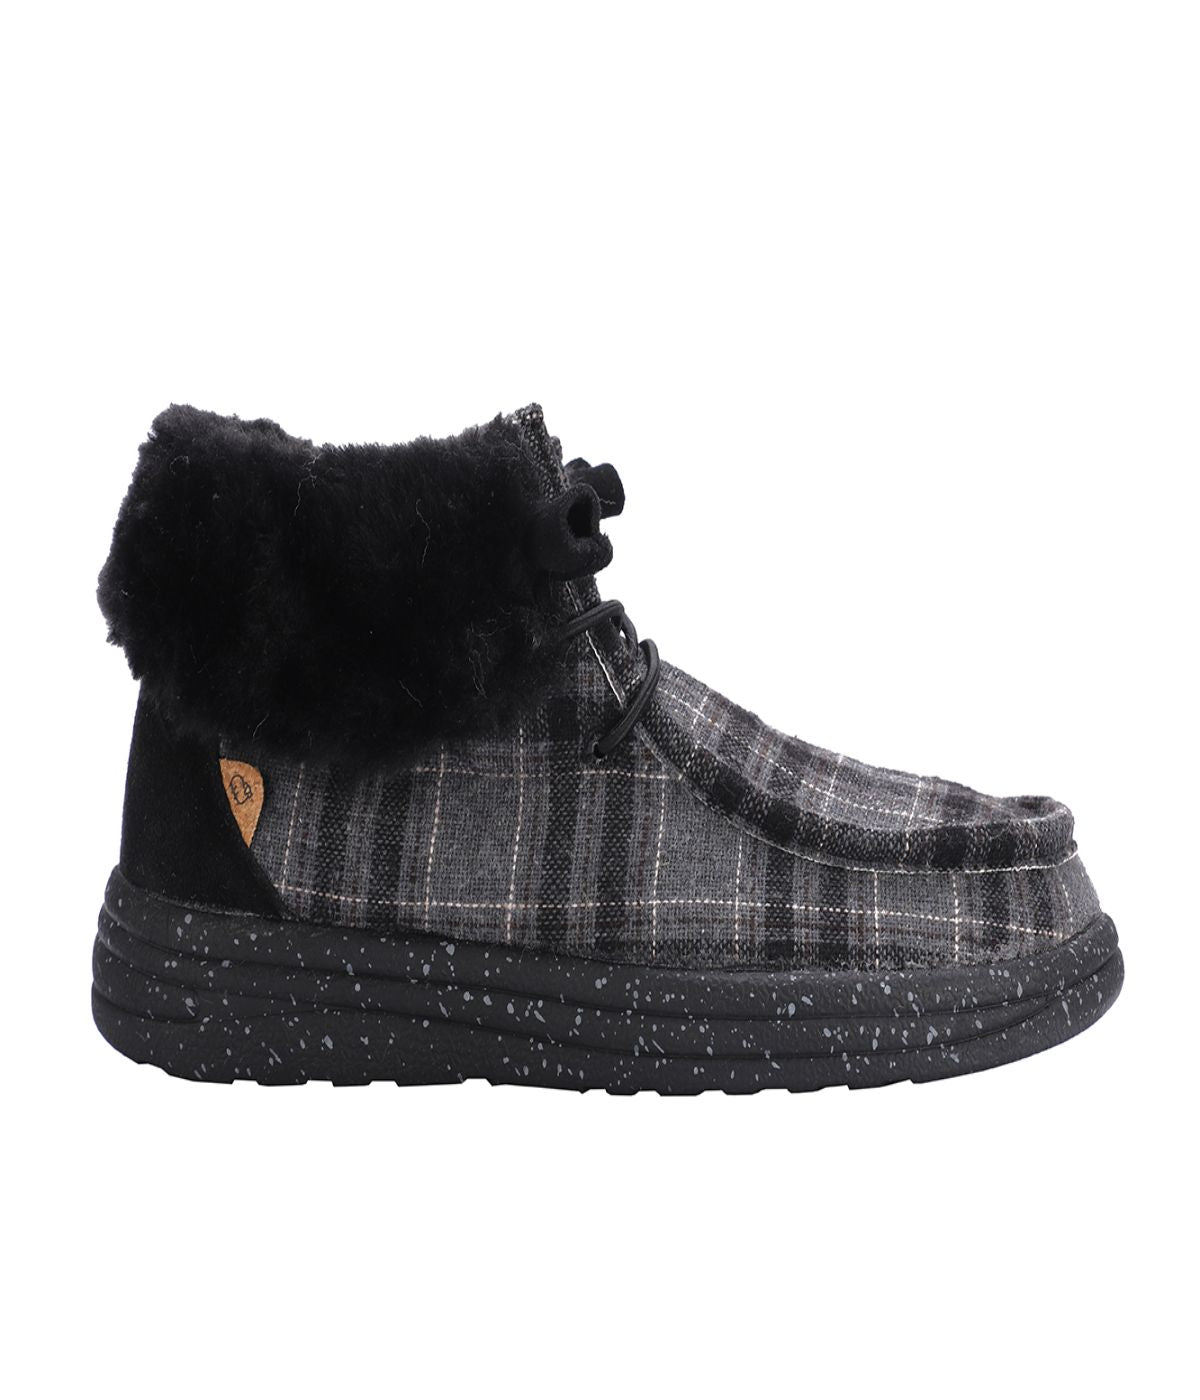 Ladies bootie with Textile, Suede or PU uppers CHARCOAL PLAID